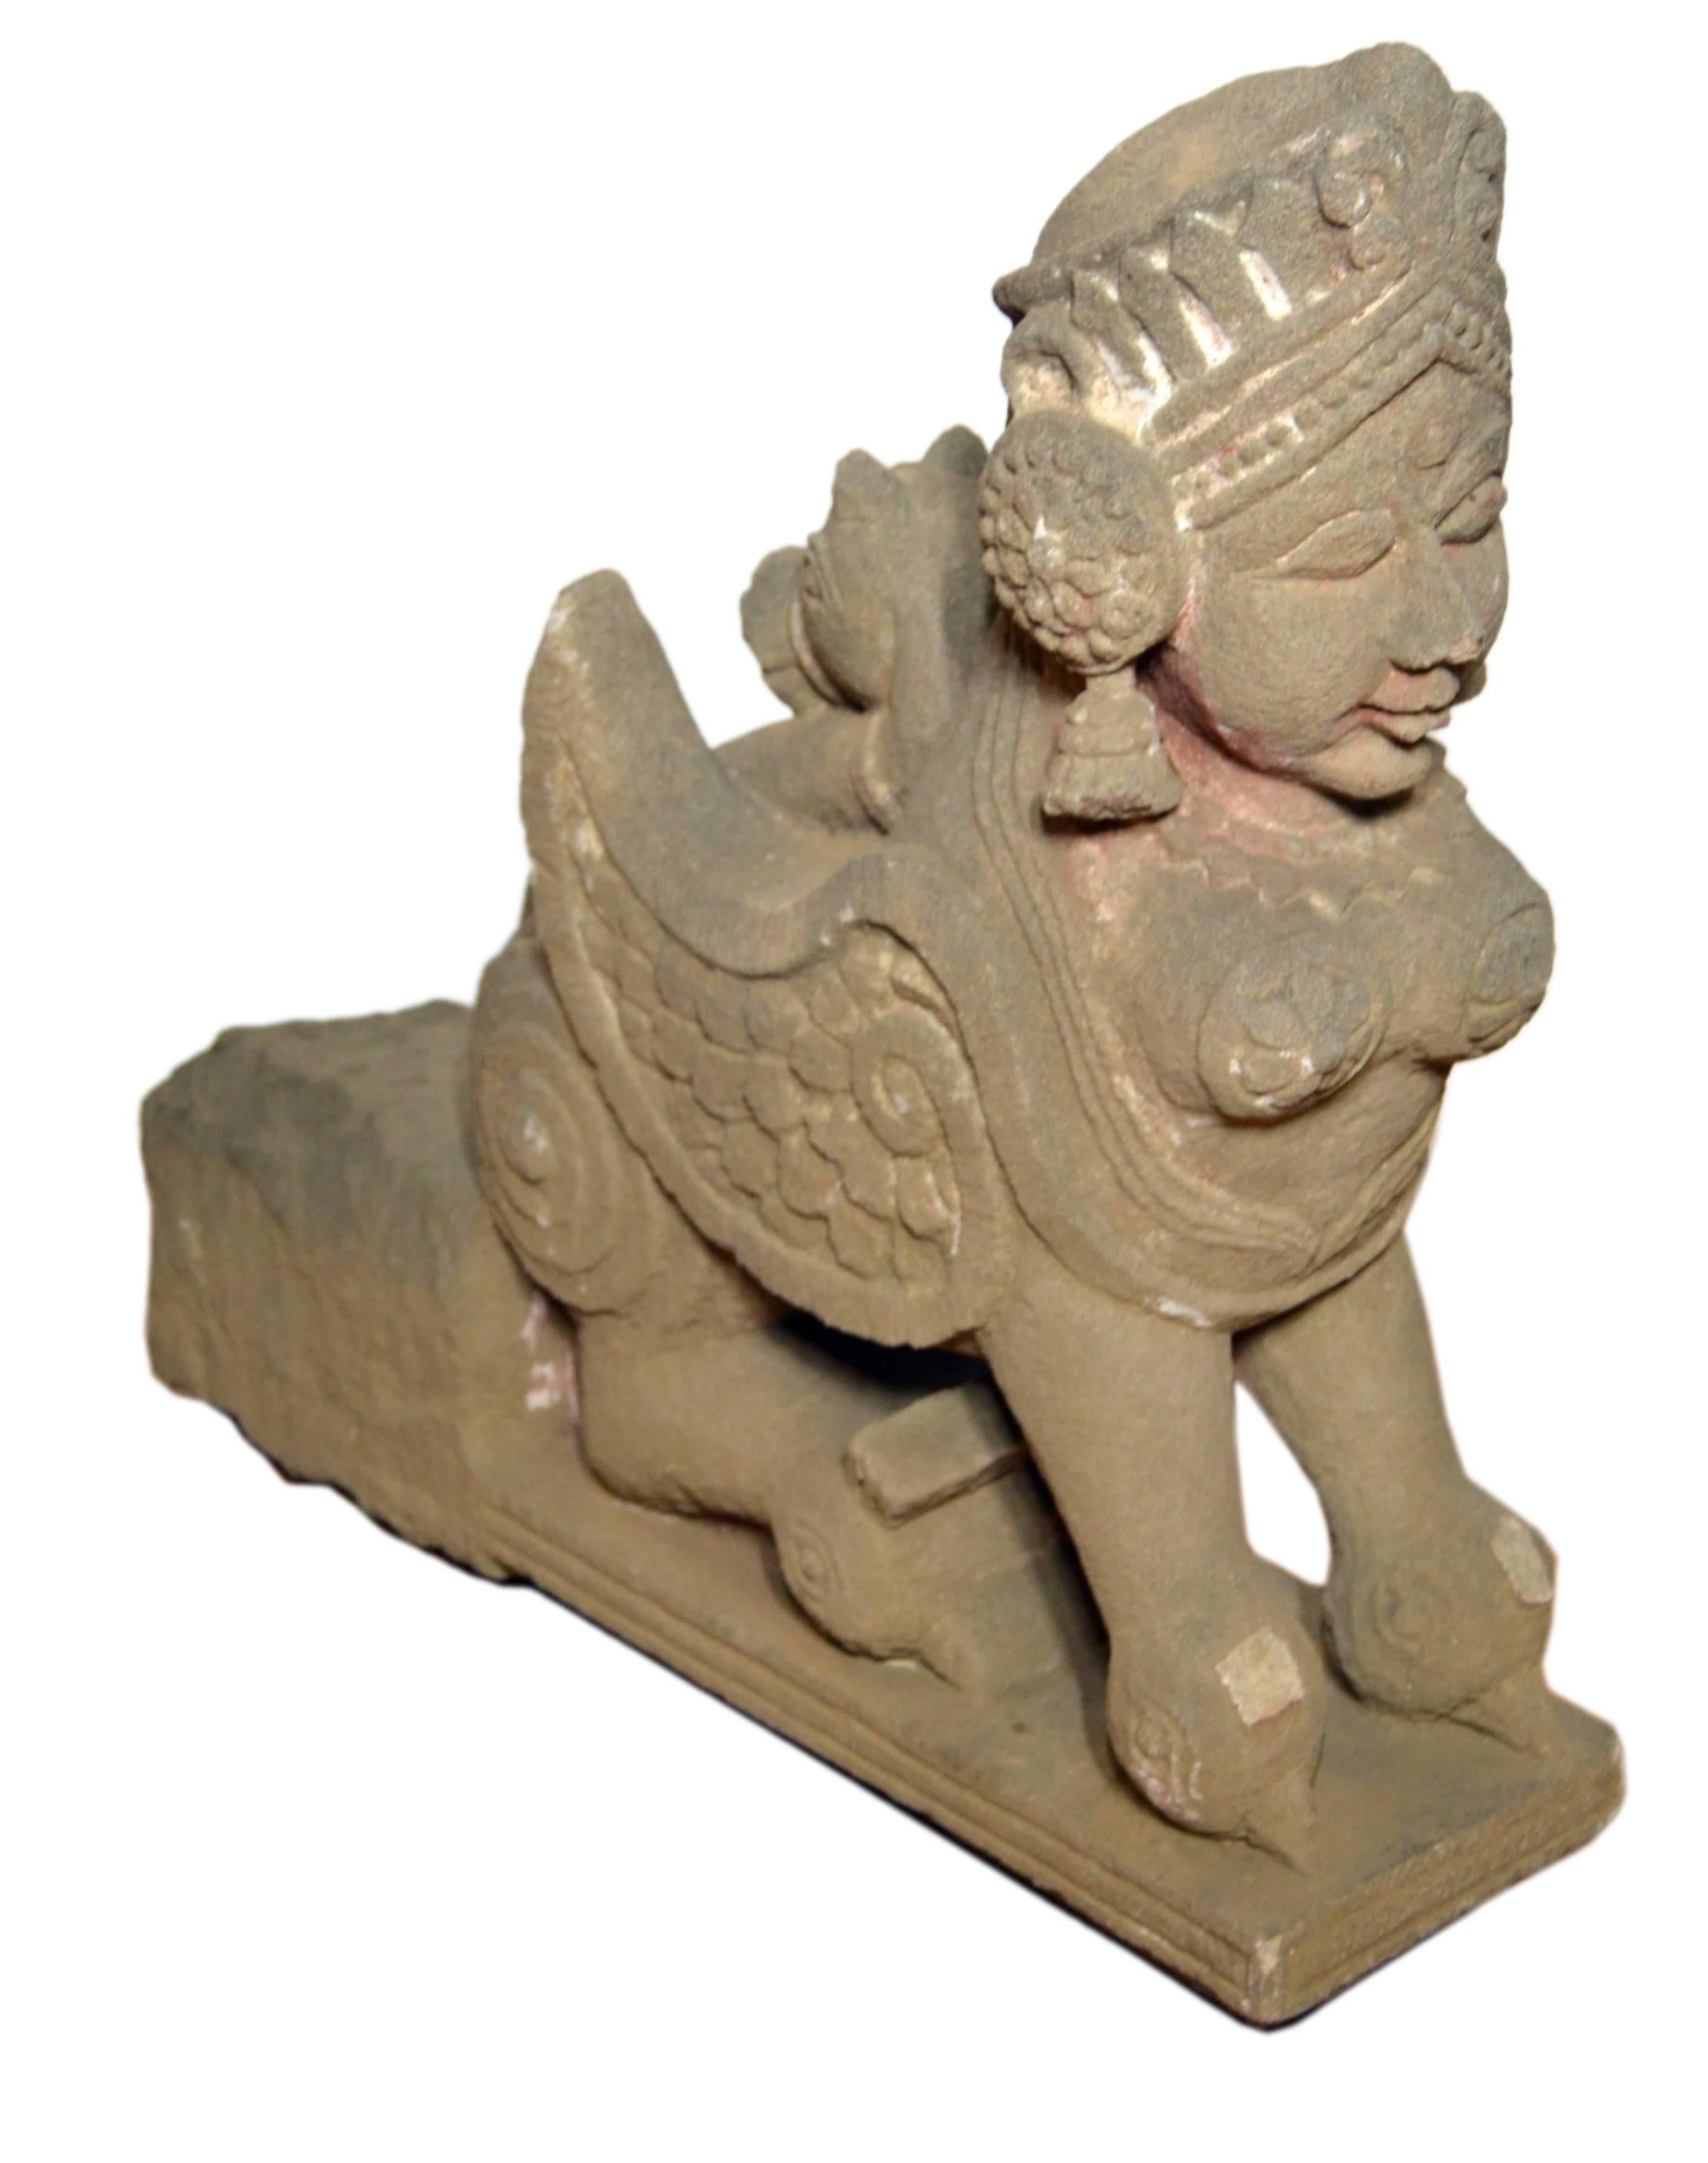 19th Century Hand-Carved Stone Sphinx Sculpture with Tiara and Earrings In Good Condition For Sale In Yonkers, NY